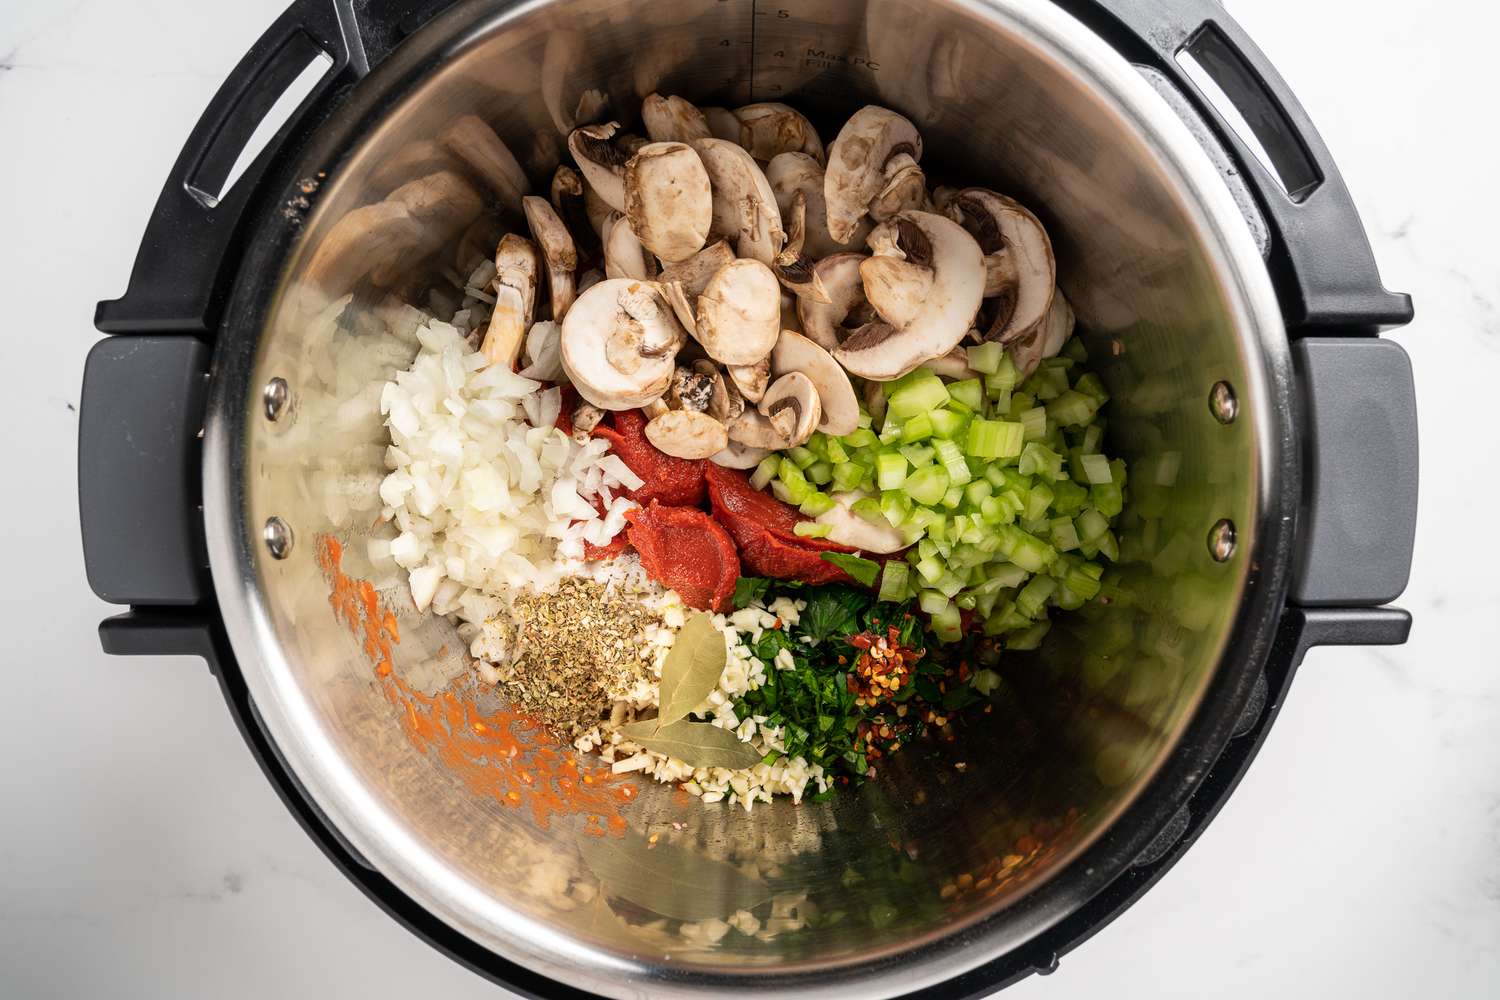 How To Cook Vegetables In Pressure Cooker - Recipes.net